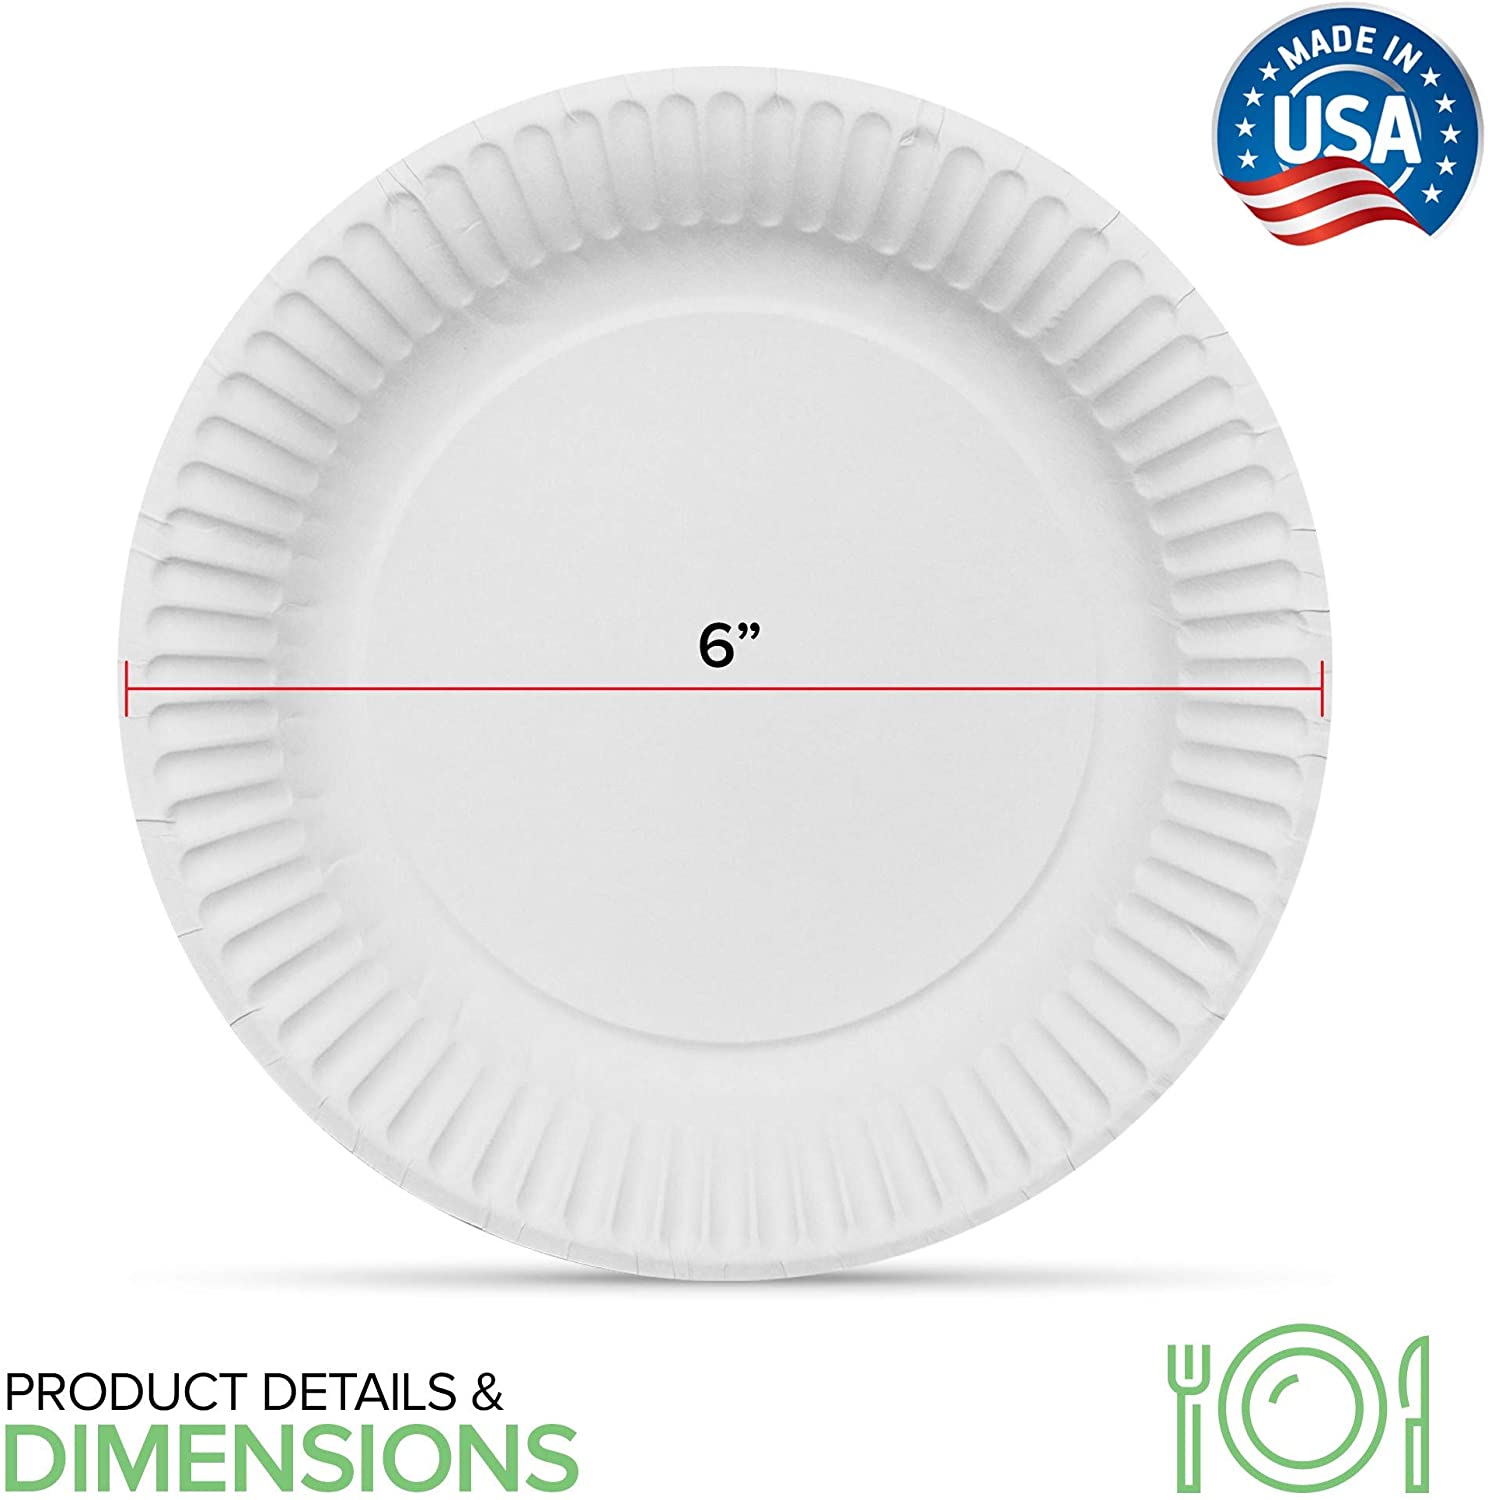 Wholesale Cake Plates, Disposable Large Paper Plates, Children'S Birthday  Parties, White Meal Plates, Picnic Plates, Dessert